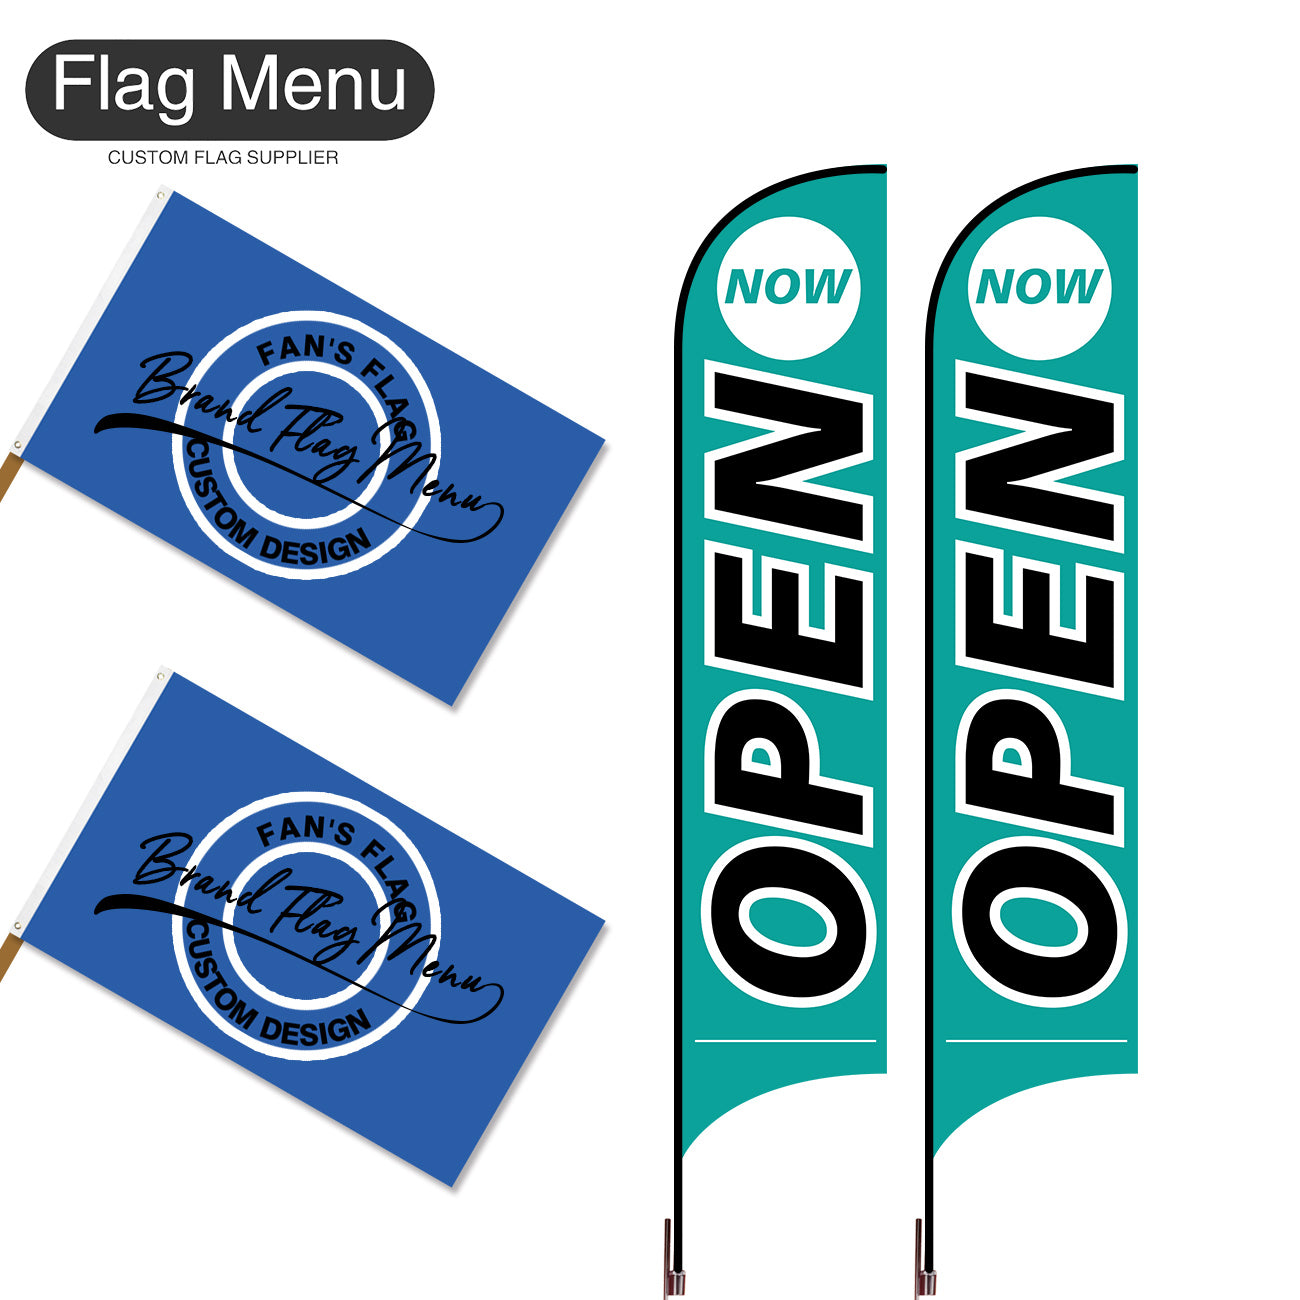 Outdoor Advertising Set - B-Green C-S - Feather Flag -Double Sided & 3'x5' Regular Flag -Single Sided-Cross & Water Bag-Flag Menu